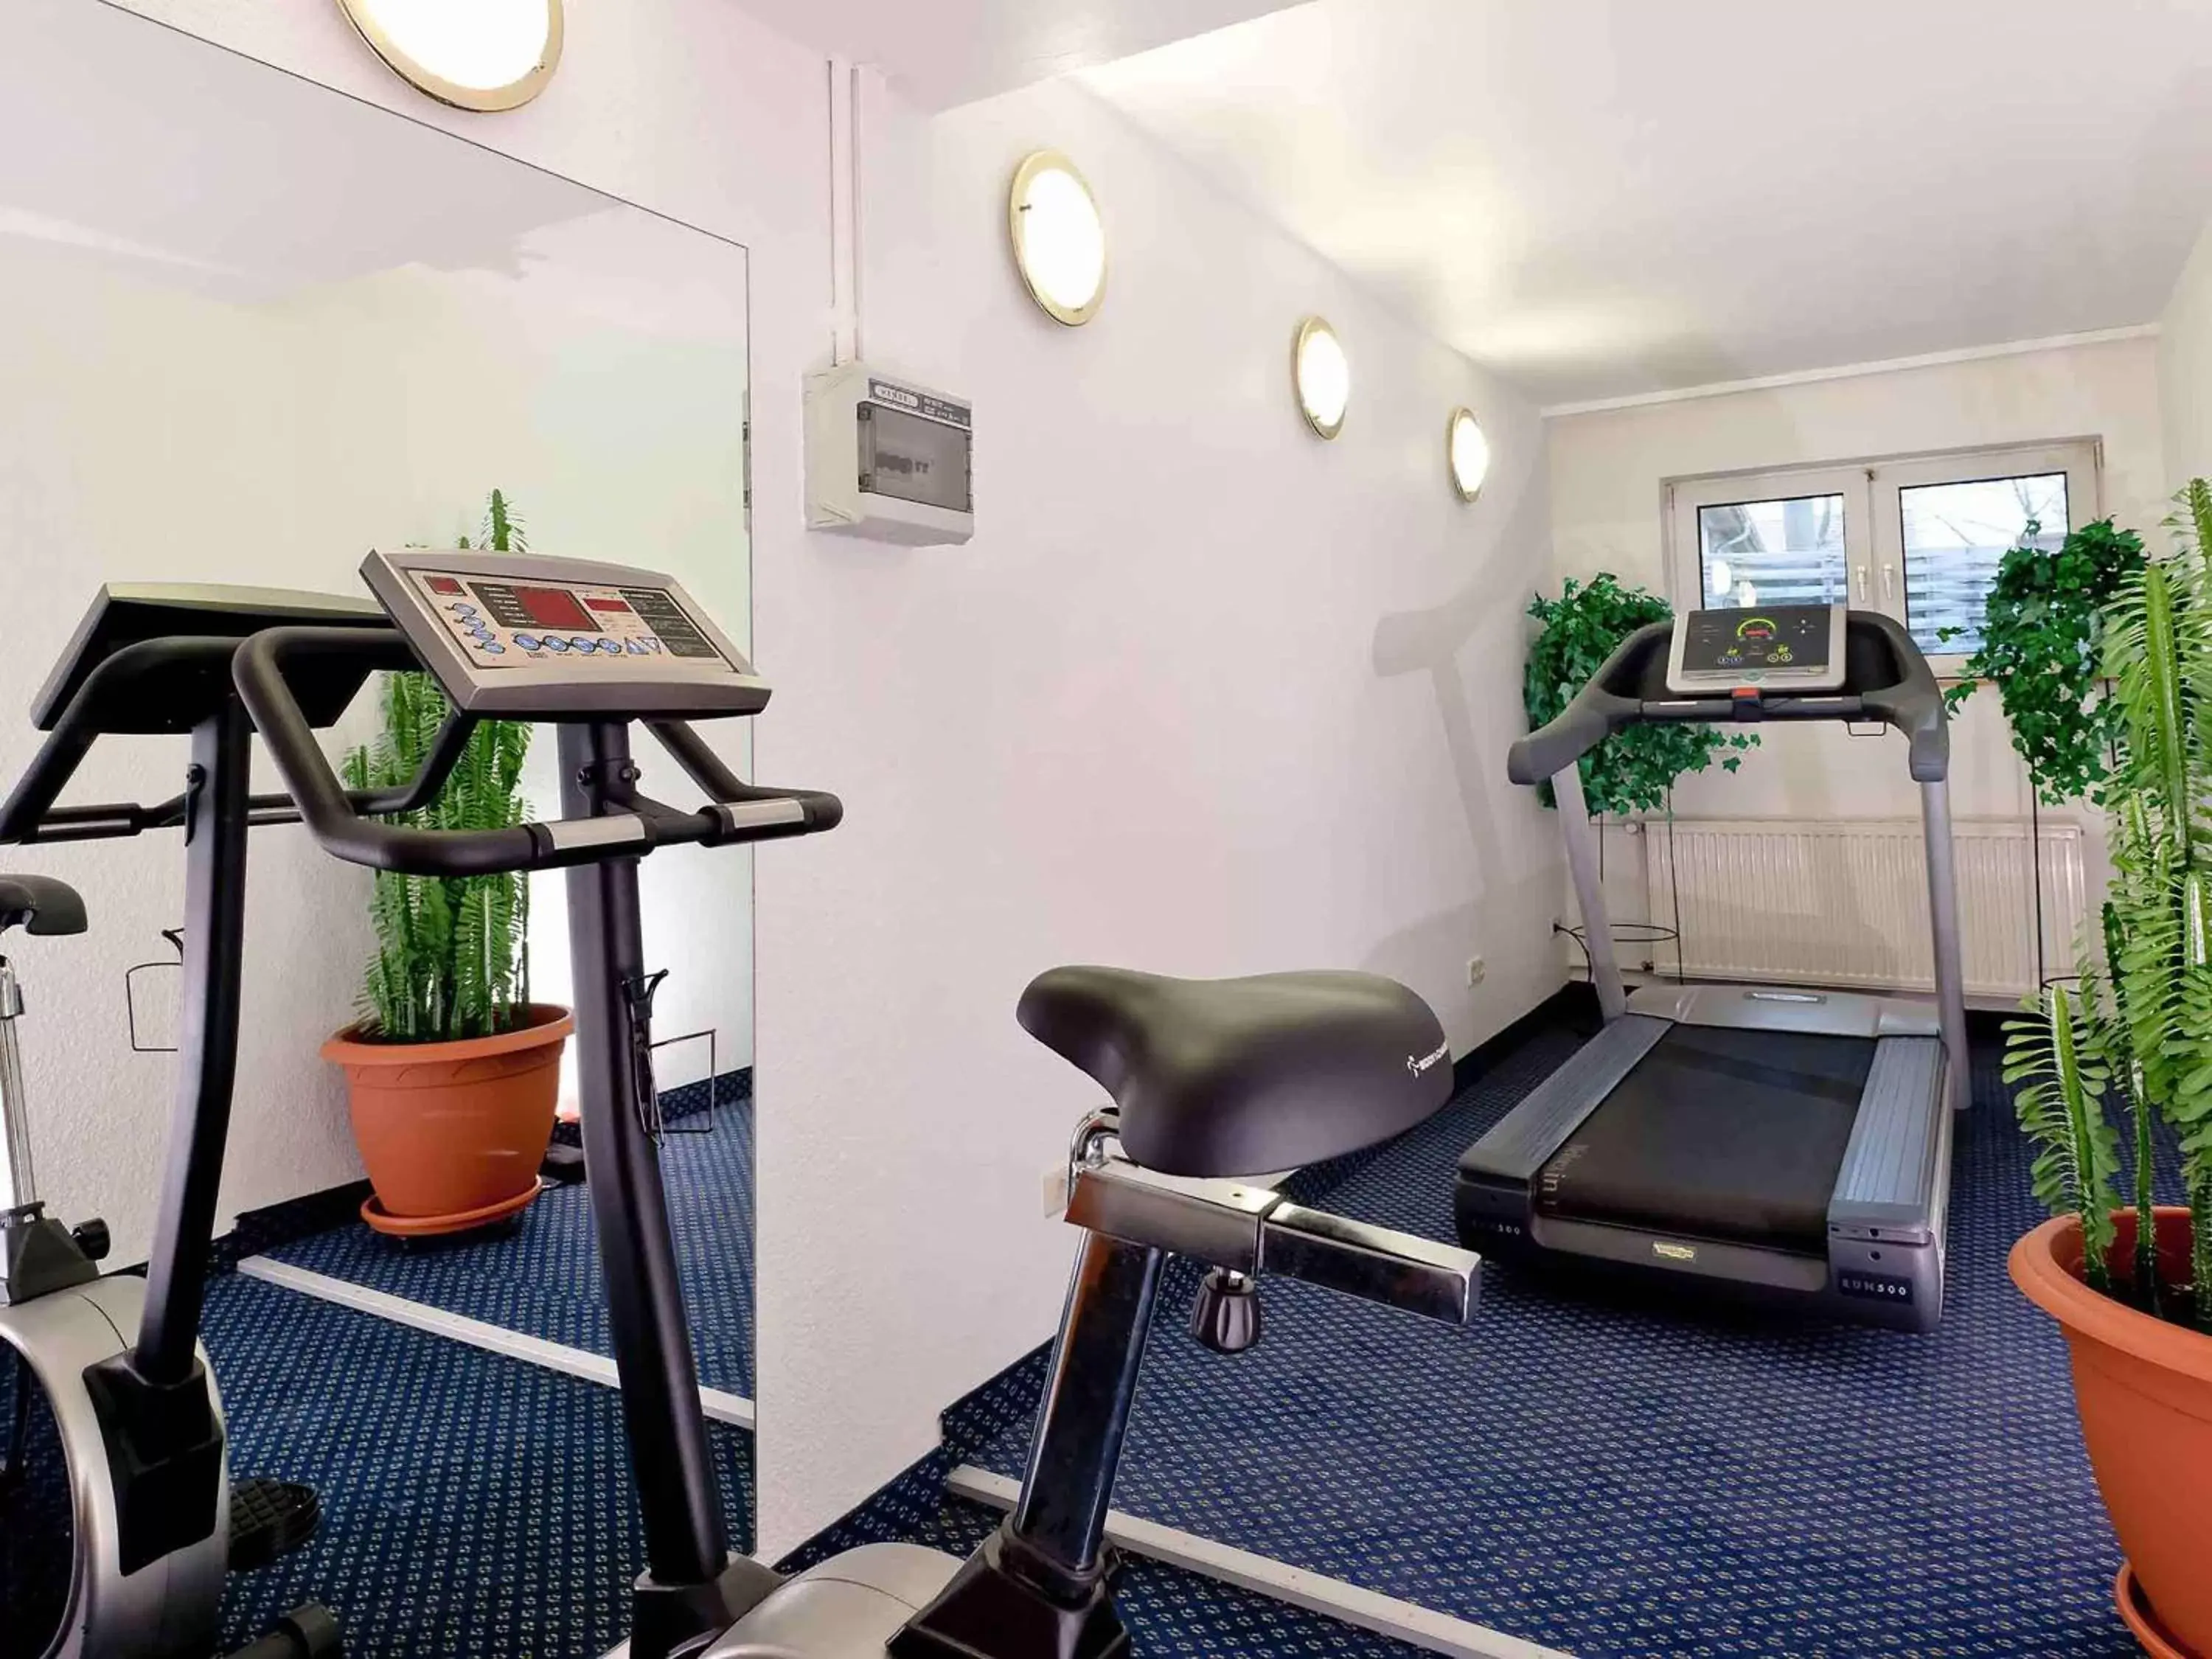 Fitness centre/facilities, Fitness Center/Facilities in Mercure Hotel am Entenfang Hannover